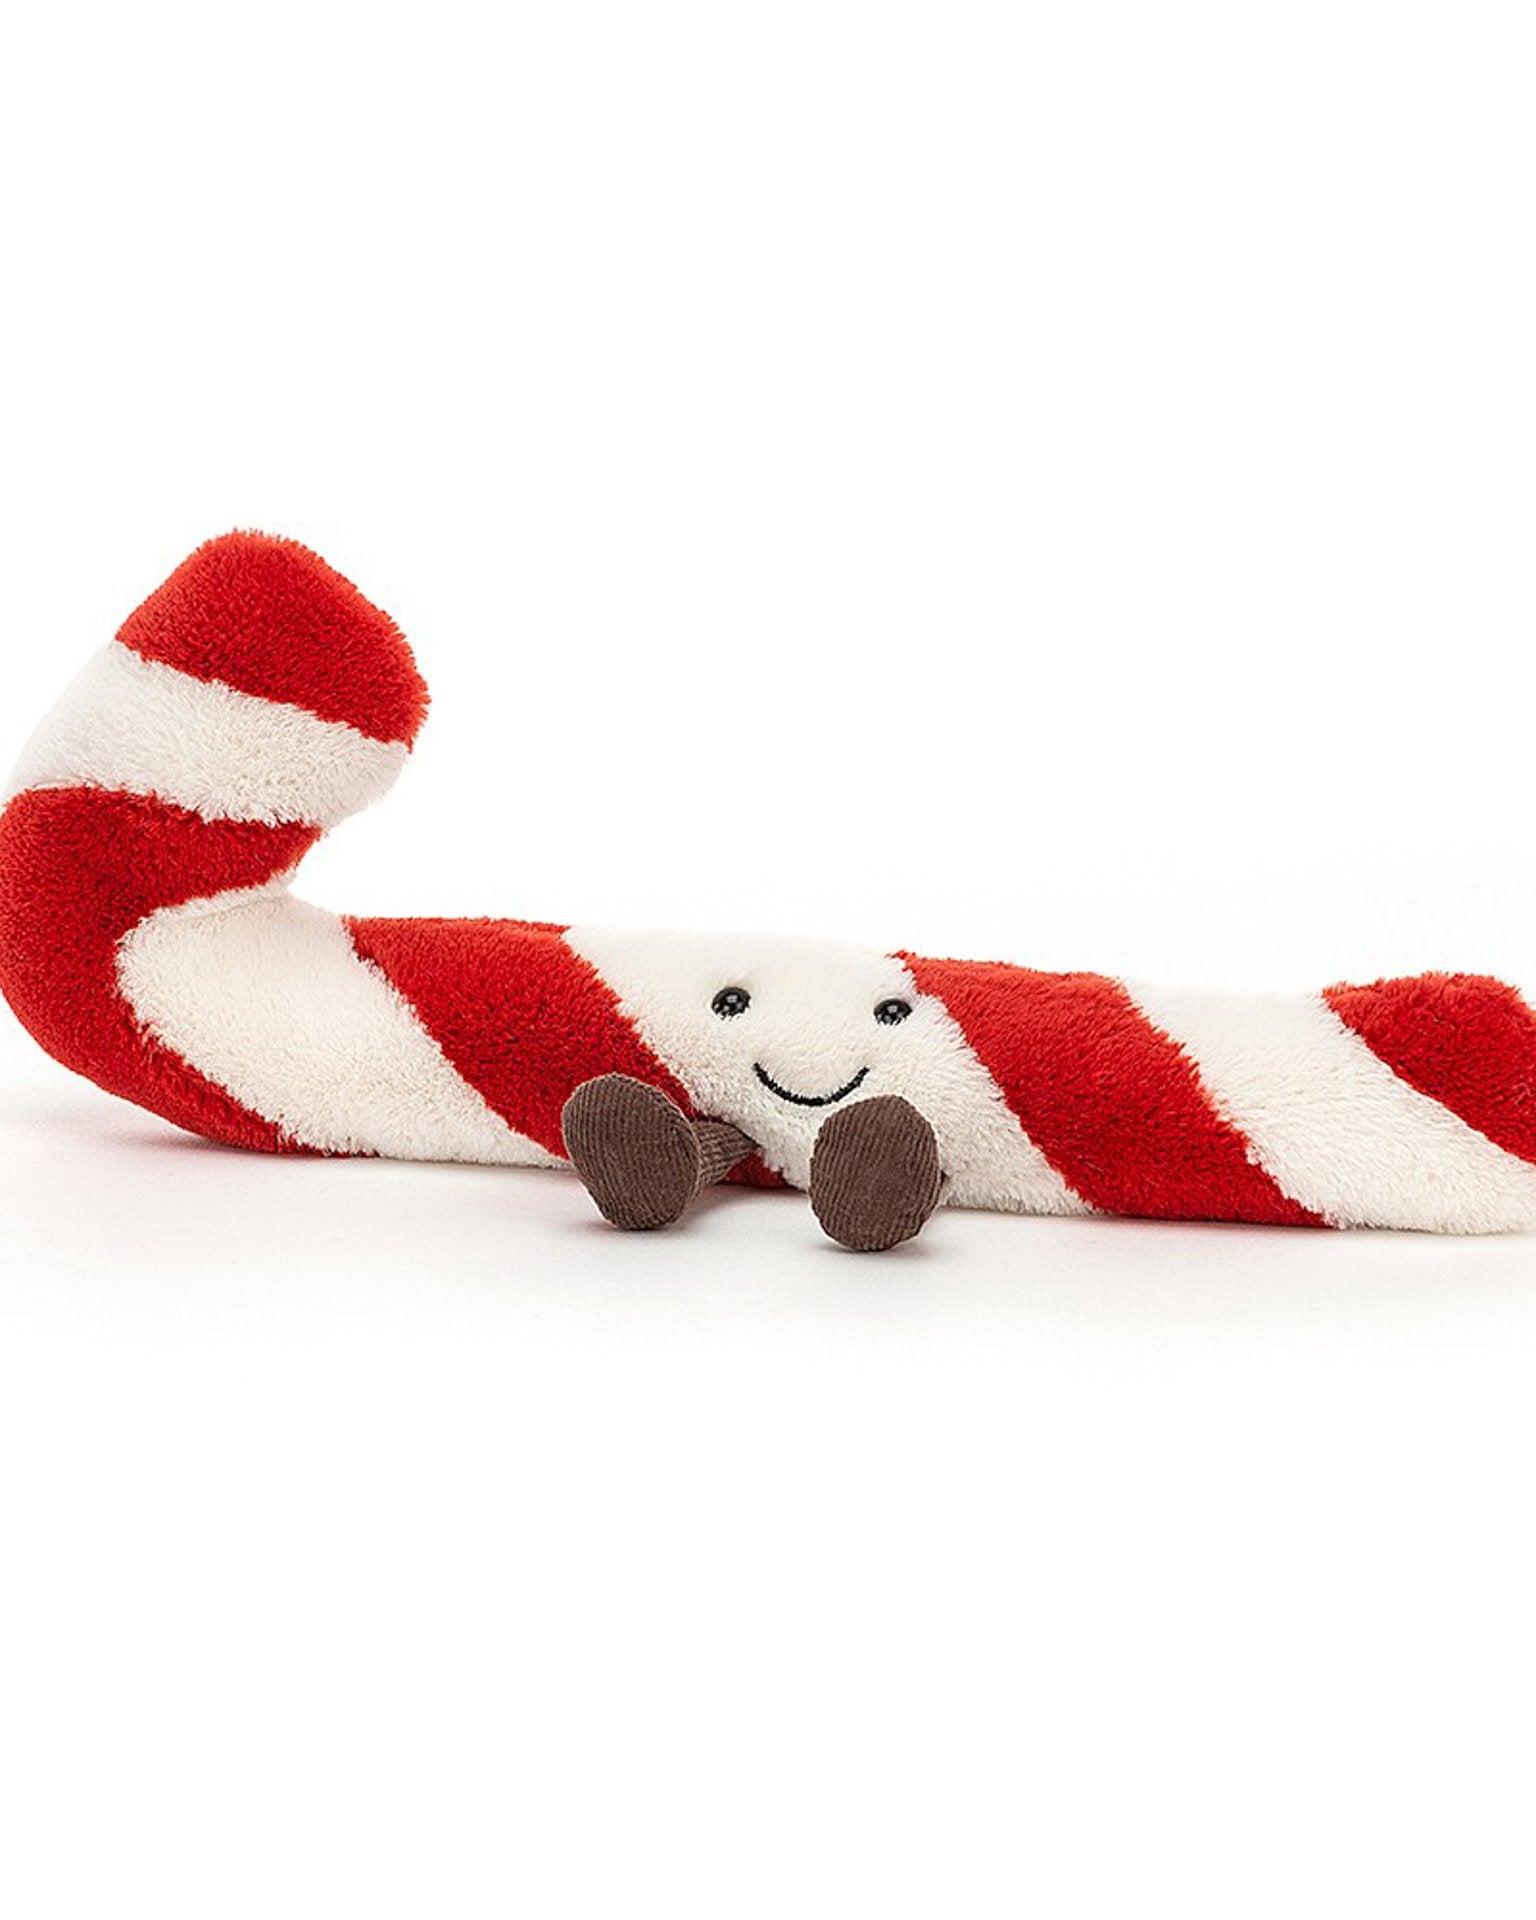 BNWT Jellycat Little Amuseable Candy Cane Christmas Soft Toy Brand New With Tags 